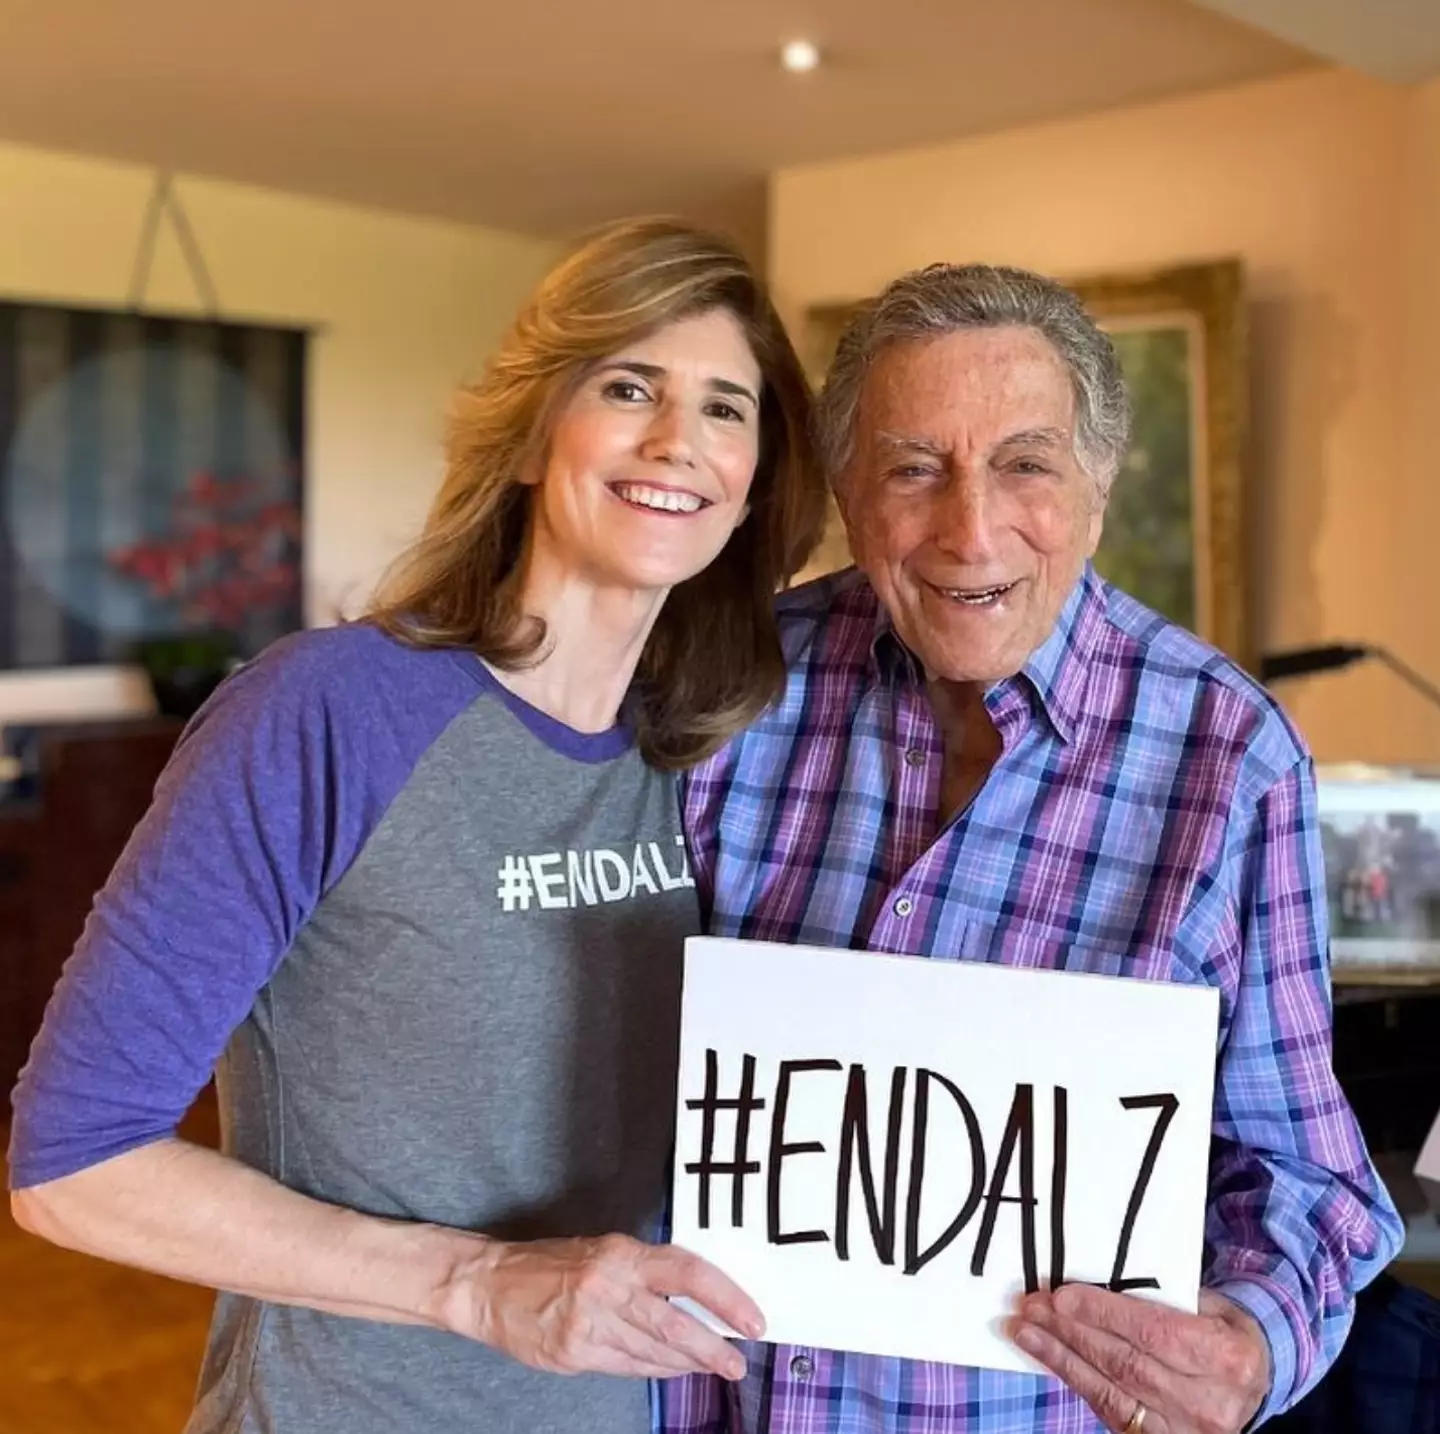 Tony Bennett with his wife Susan raising awareness about Alzheimer's.